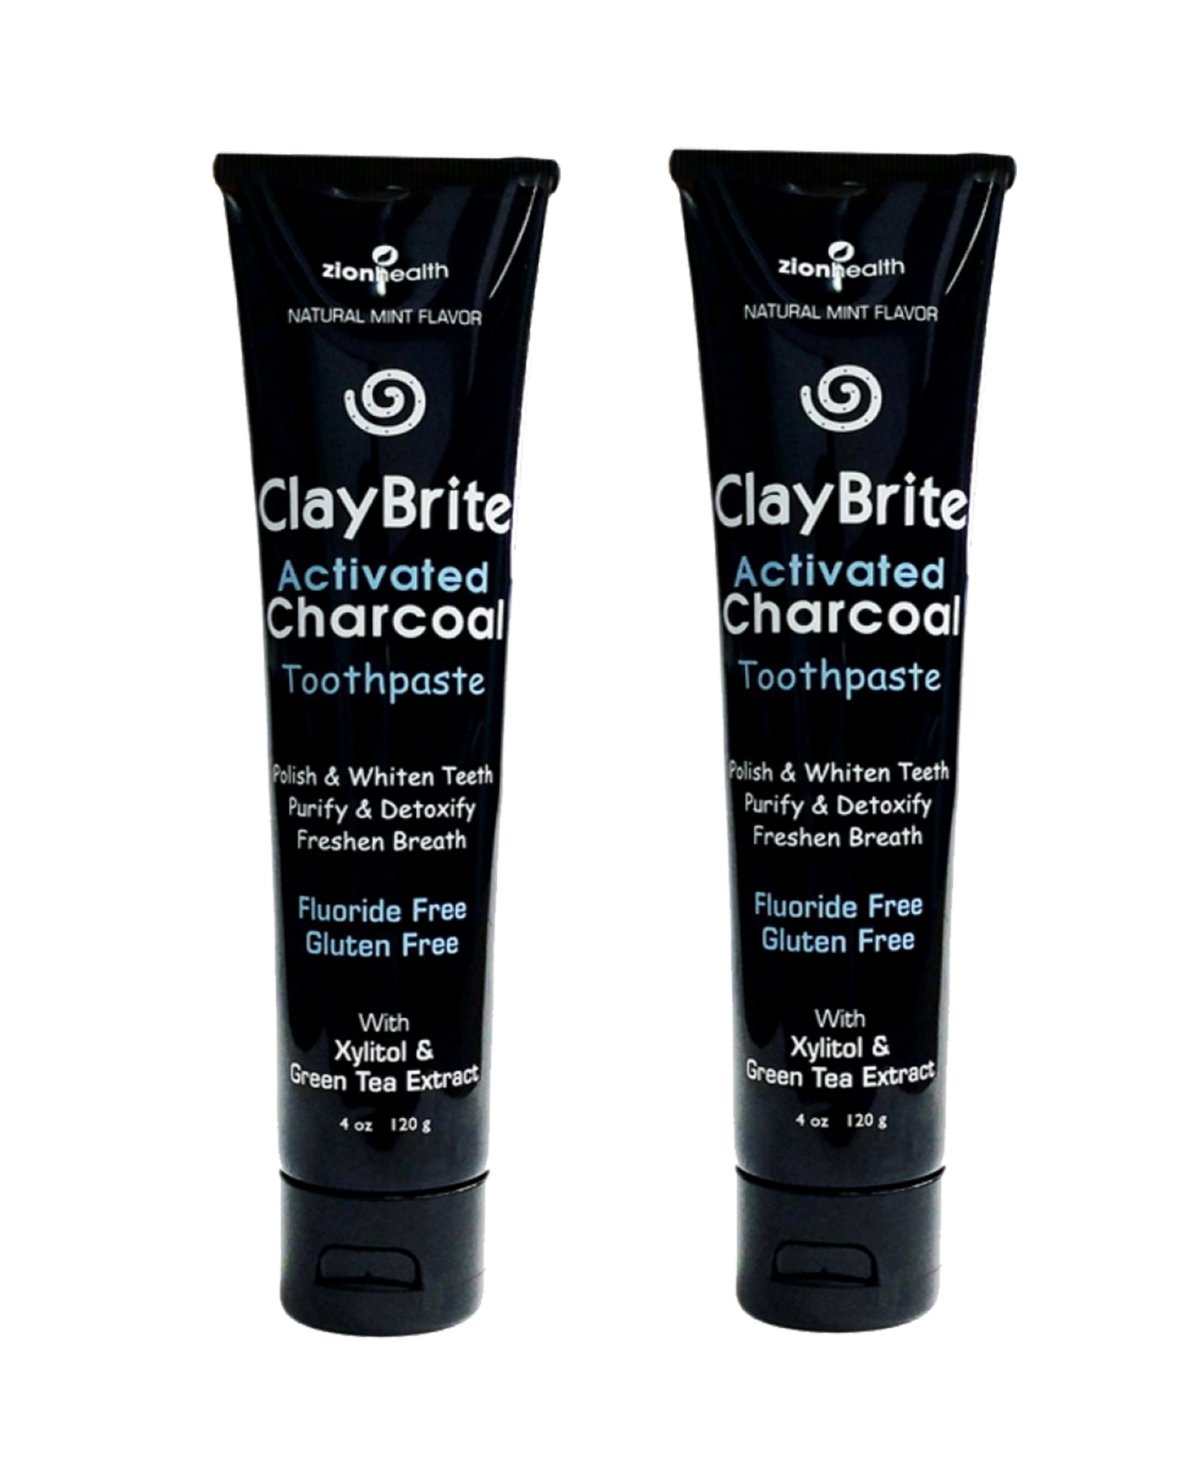 ZION HEALTH CLAYBRITE ACTIVATED CHARCOAL TOOTHPASTE SET OF 2 PACK, 8OZ